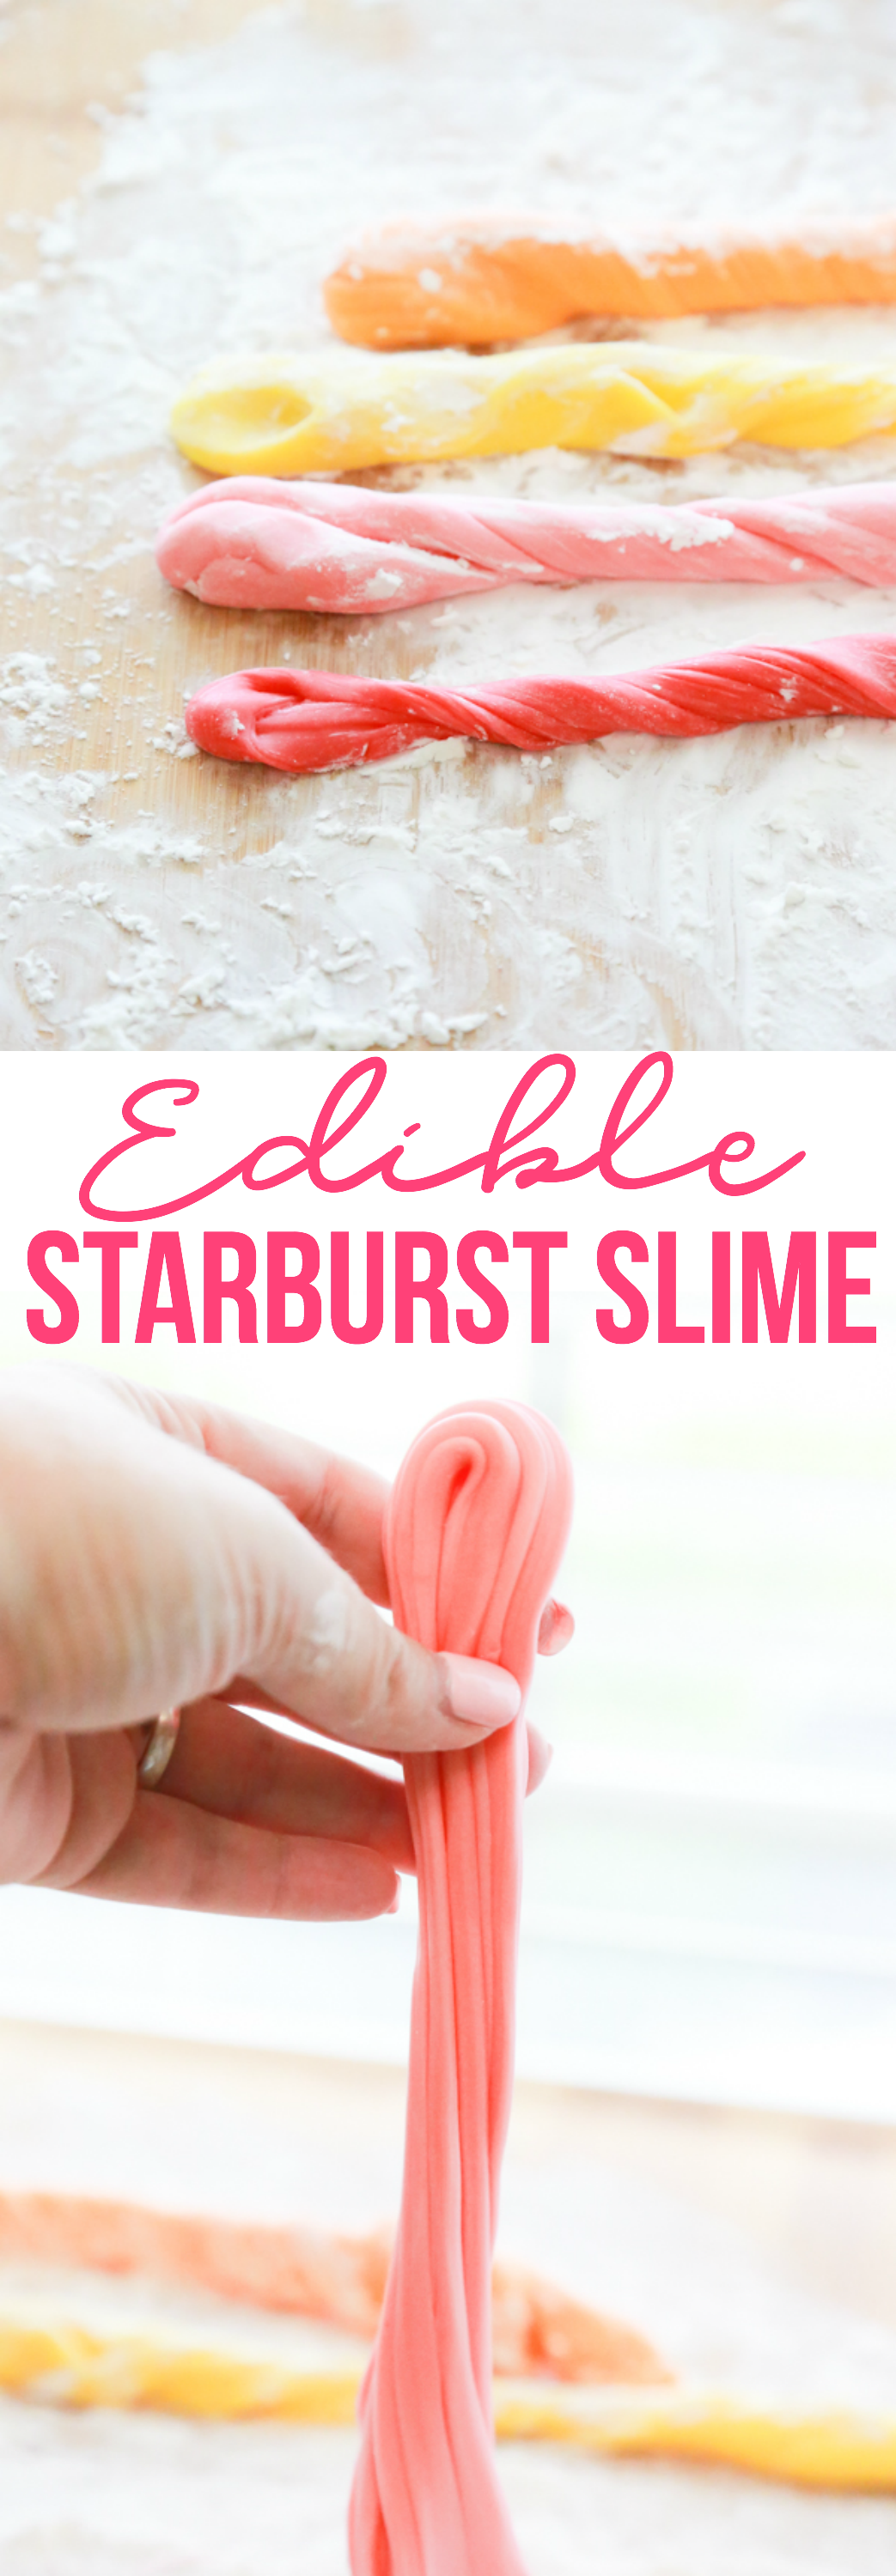 If your children love slime like mine do, they’ll love this Edible Starburst Slime made using Starburst candies.